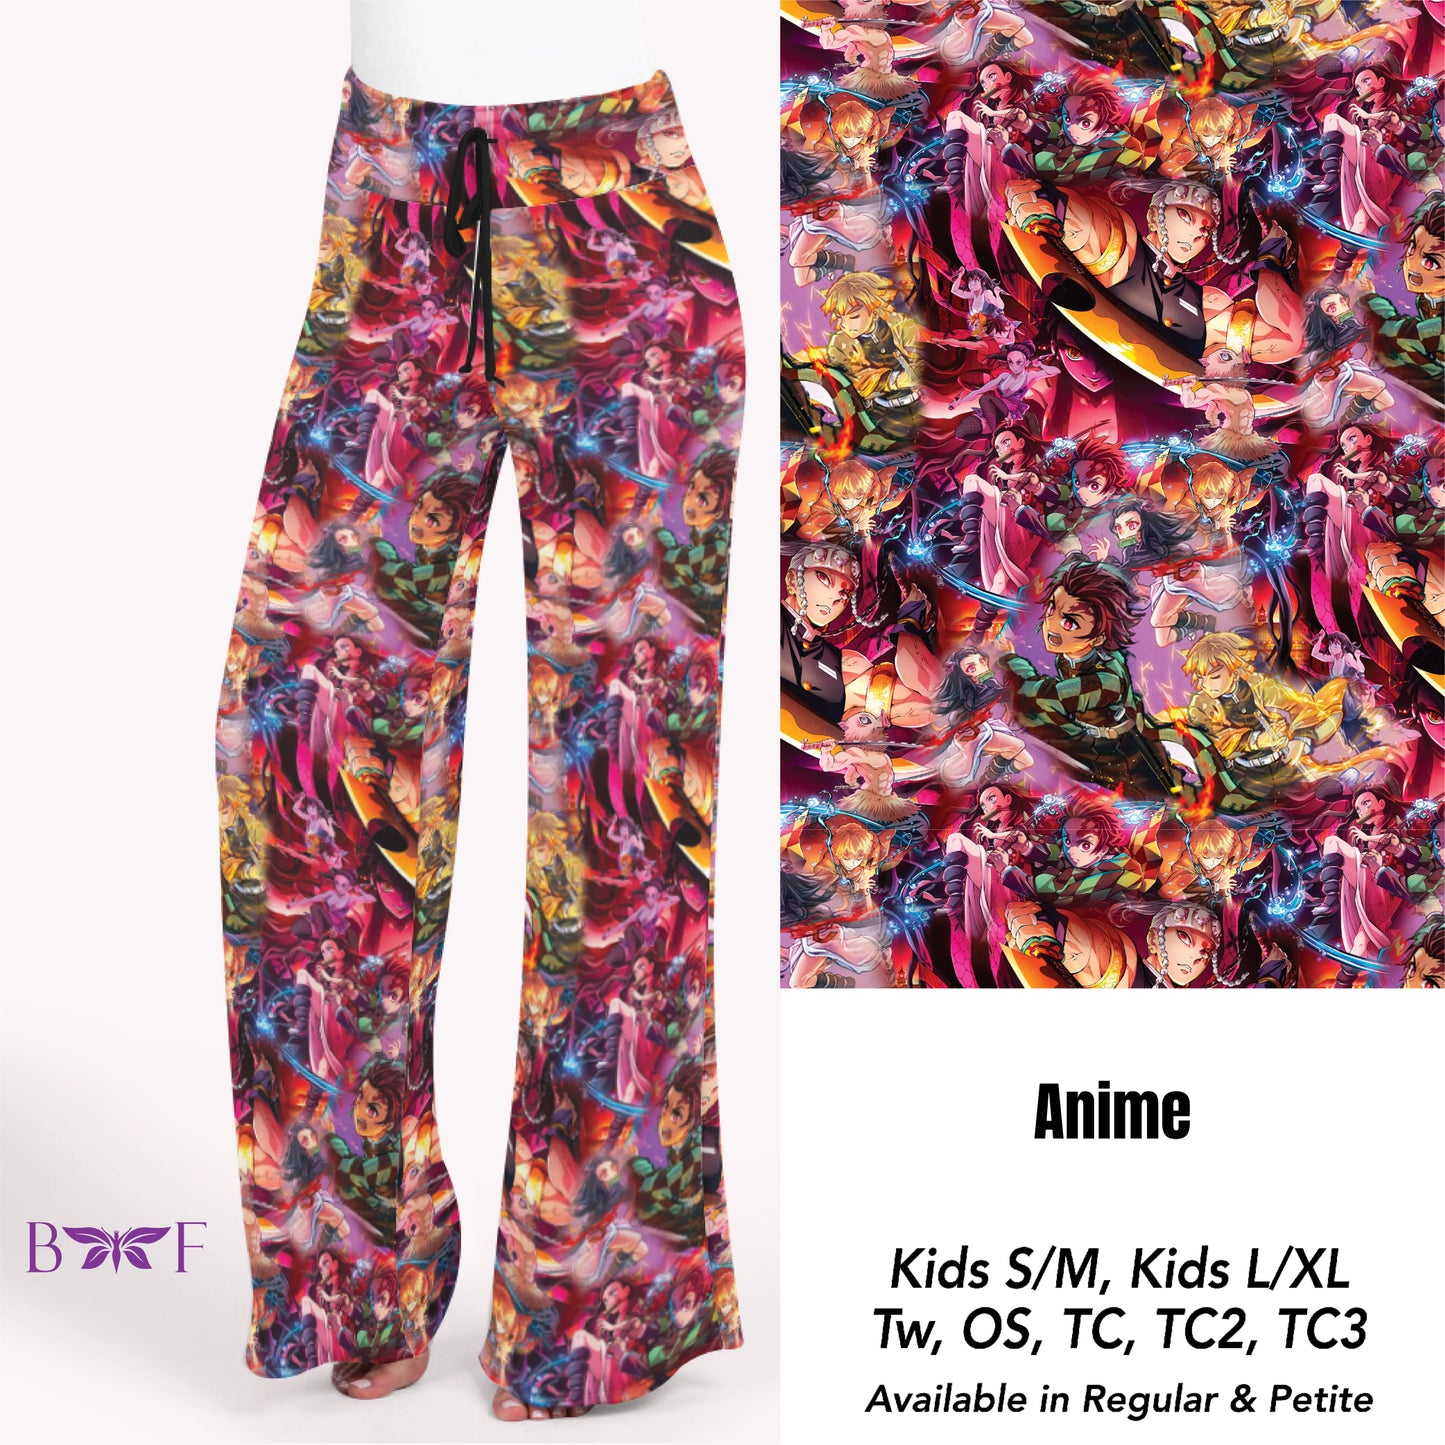 Anime leggings and Lounge Pants with pockets